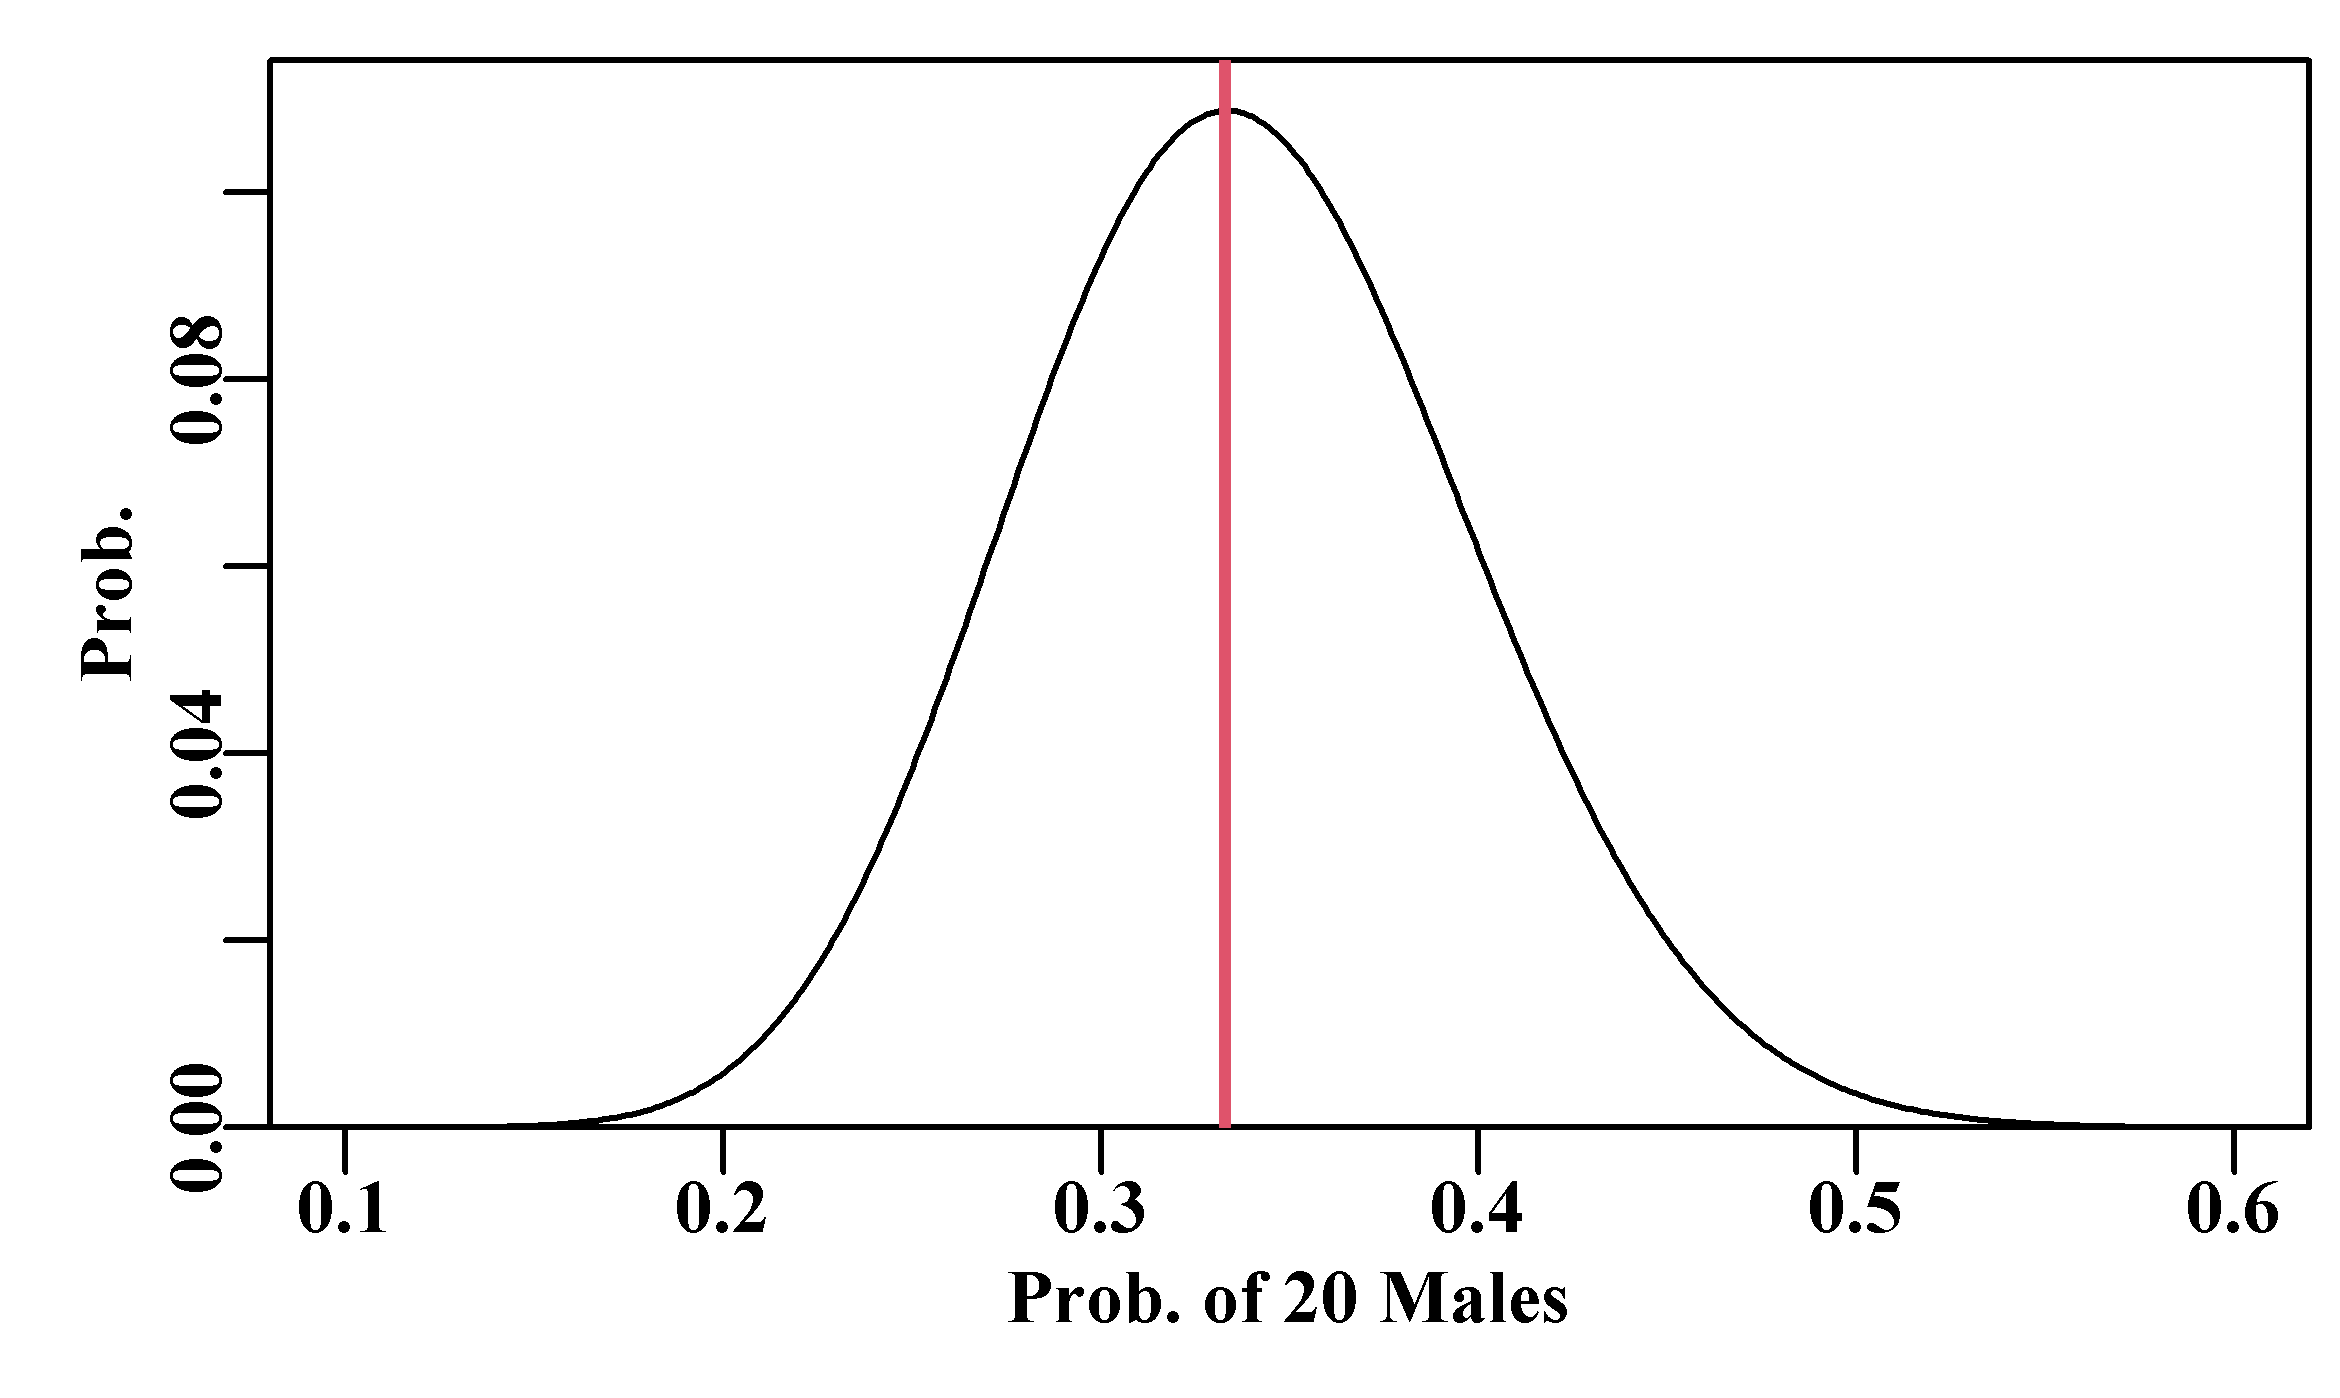 Representing the relative likelihood of the proportional sex-ratio when a sample exhibits only 20 males out of 60. Note that the likelihood of there having been a sex-ratio of 0.5 is confirmed as very low.